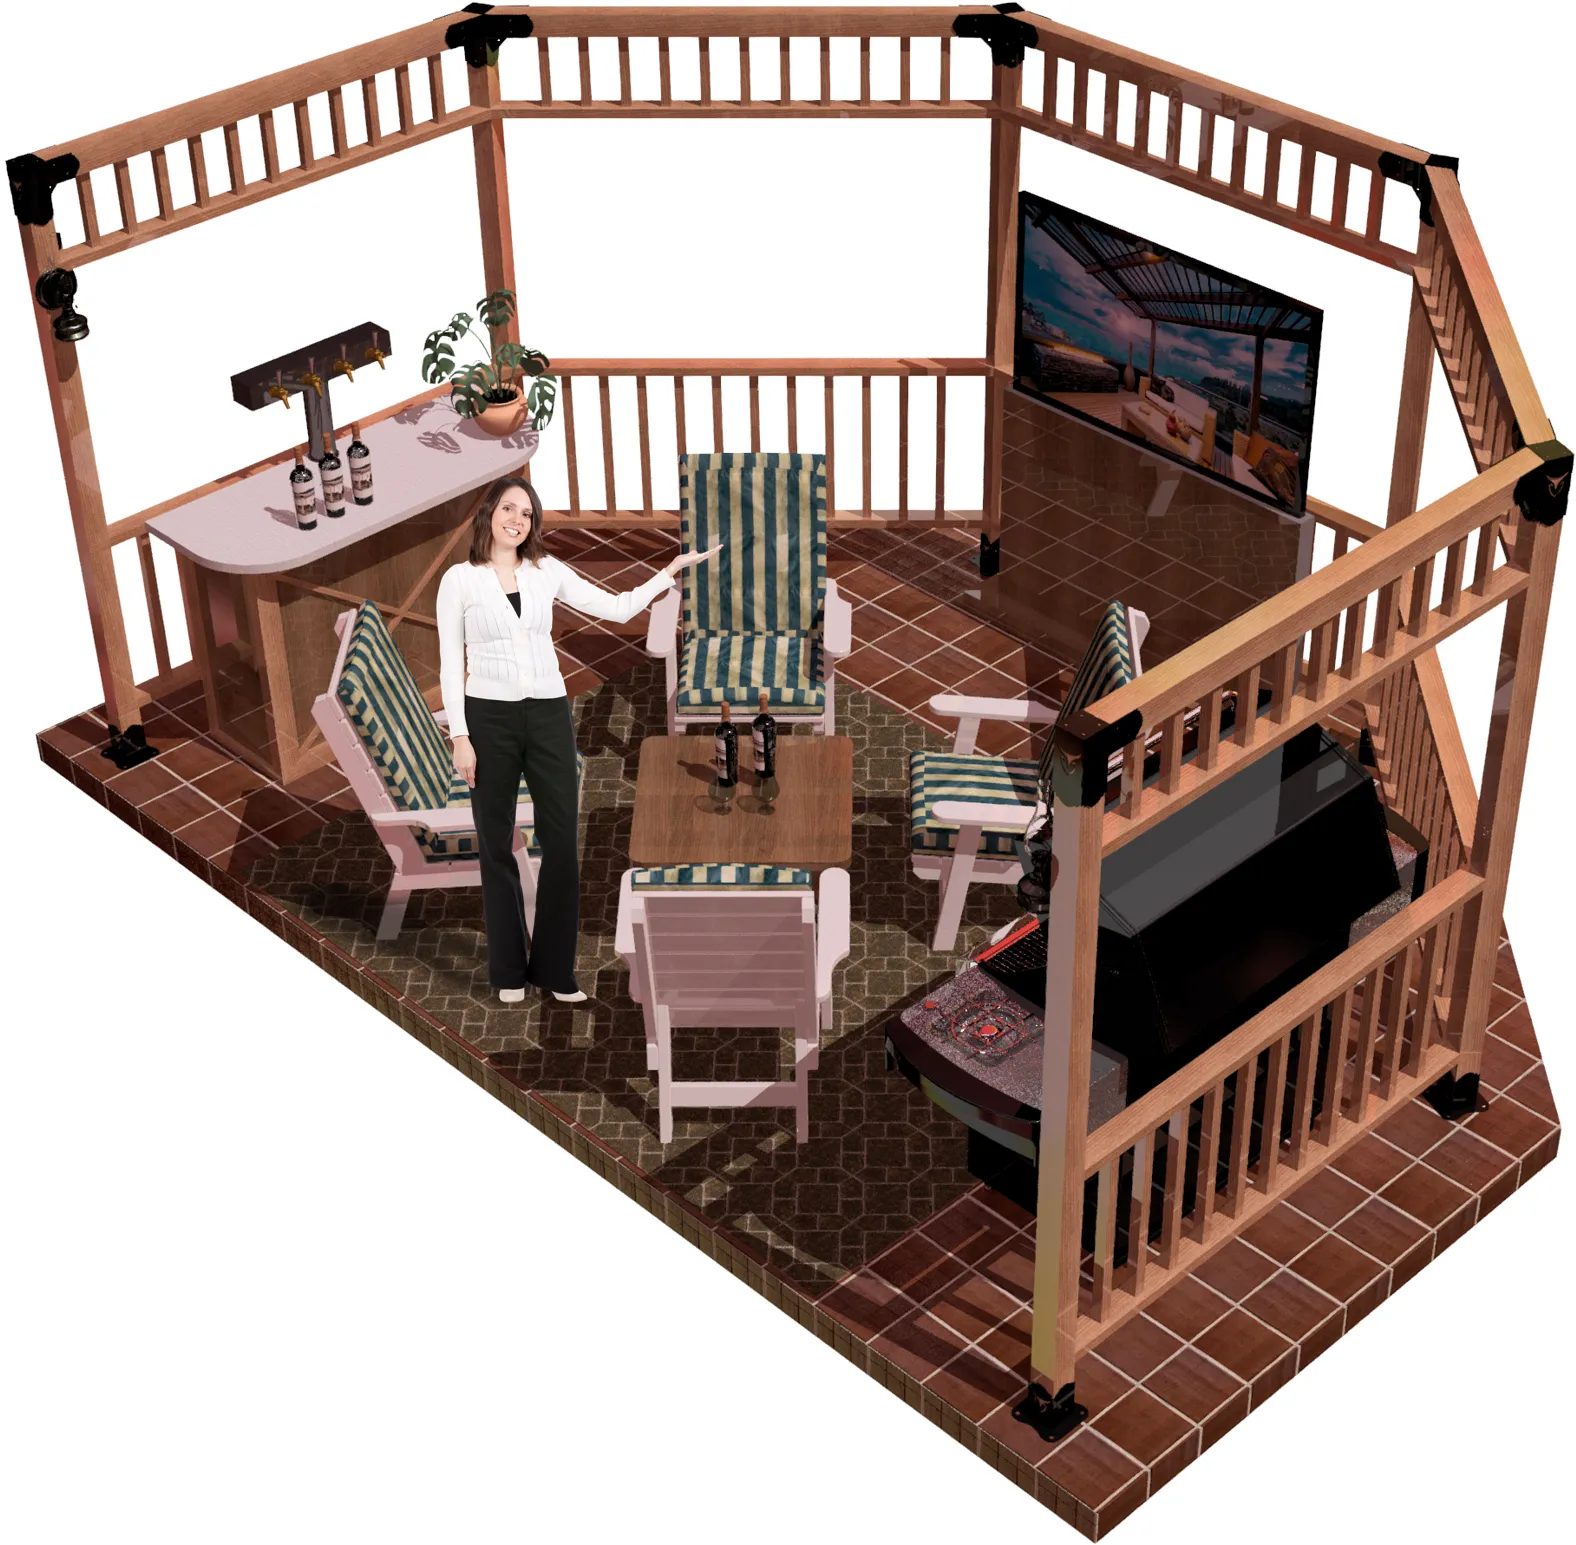 view of a DIY 4x4 open top partial octagon pergola. A bar with wine bottles, barbecuer, LED TV, and casual furniture inside and a girl standing and smiling inside it.